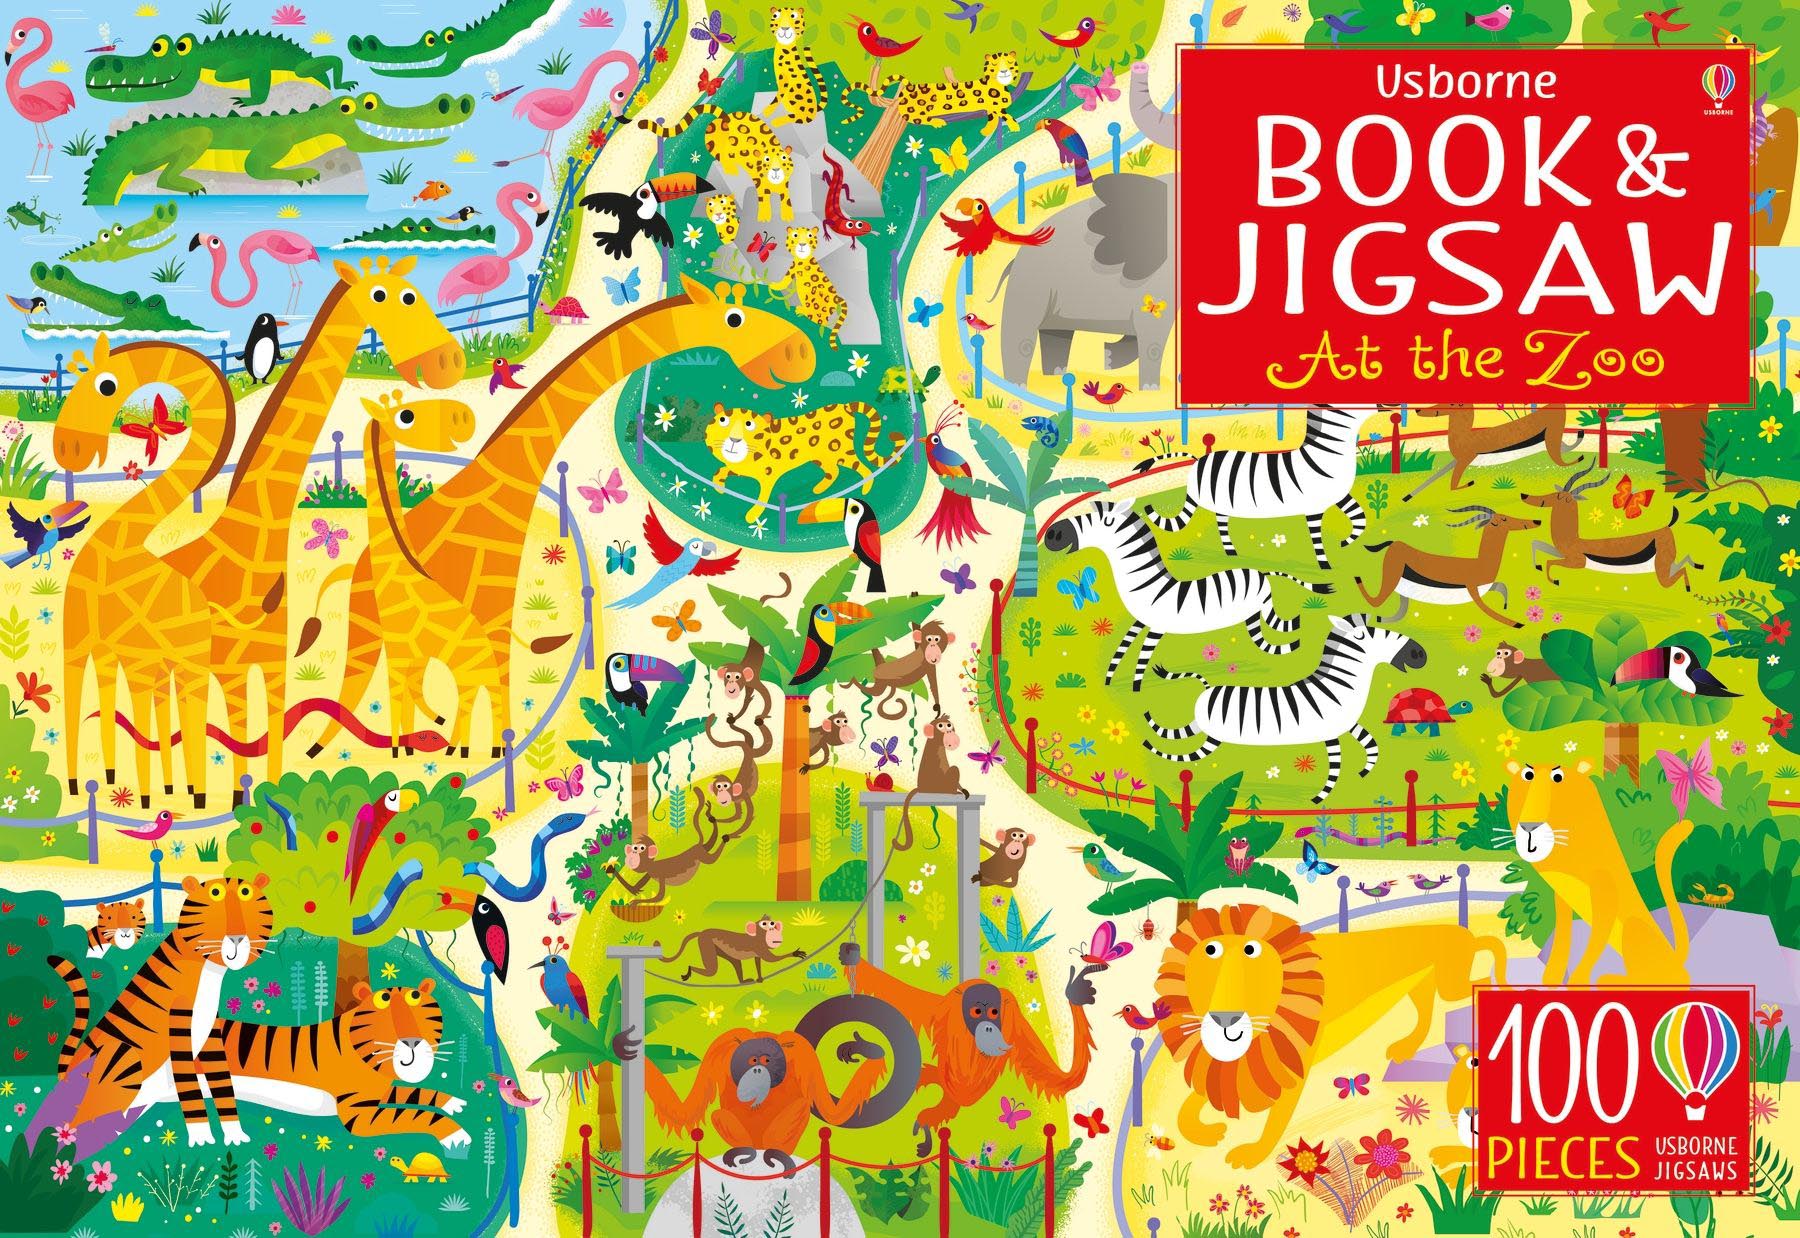 Usborne Book and Jigsaw At the Zoo